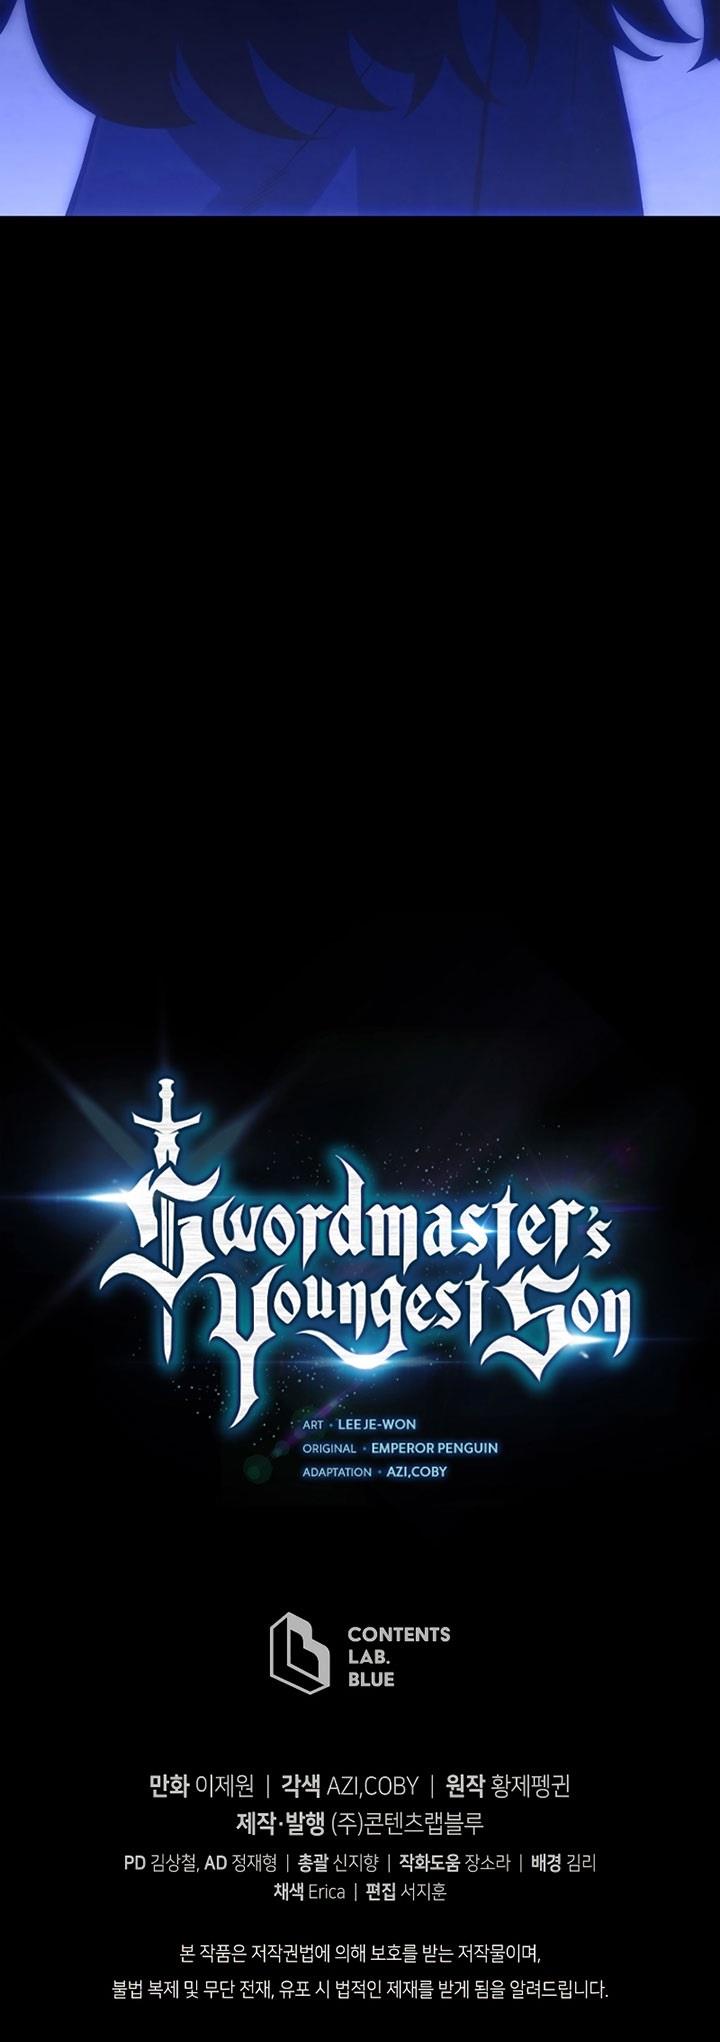 Swordmaster’s Youngest Son Chapter 102